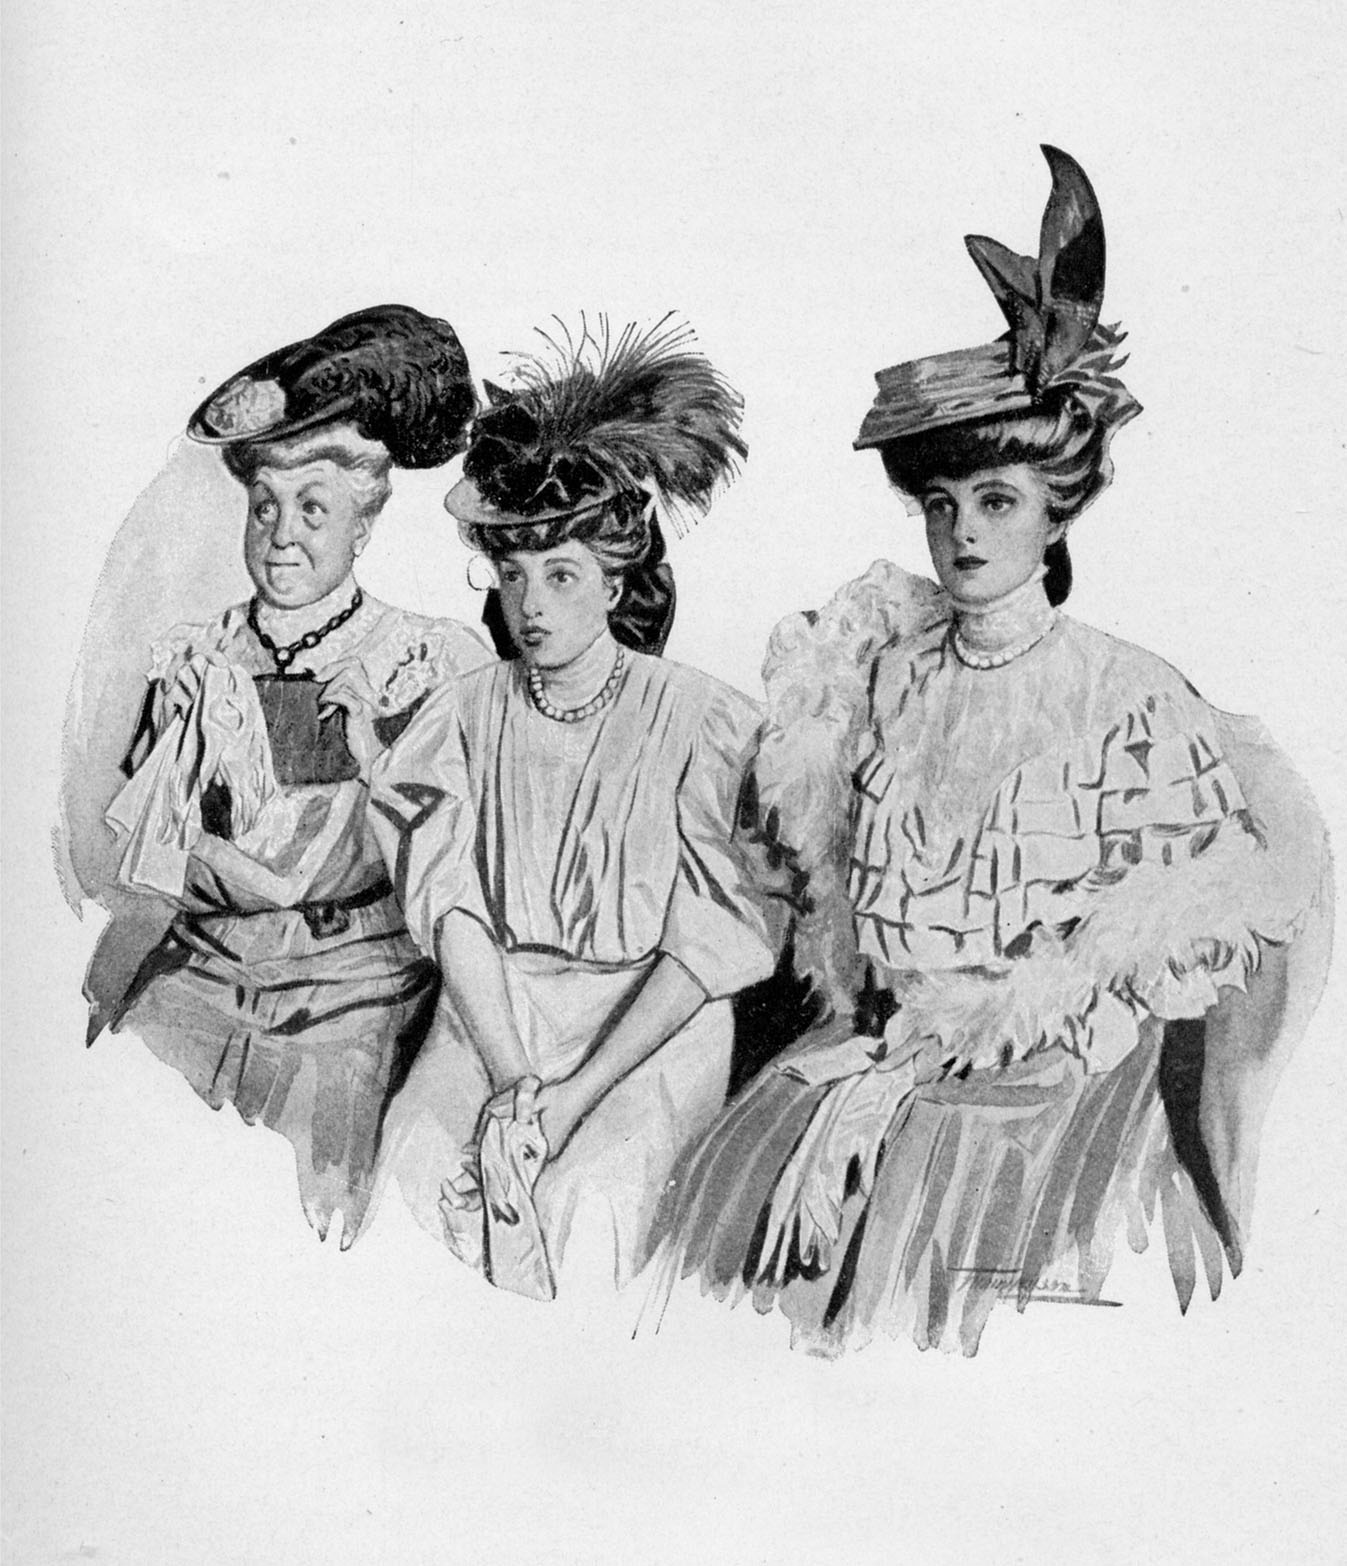 Mother, sister, and Lady Evelyn.